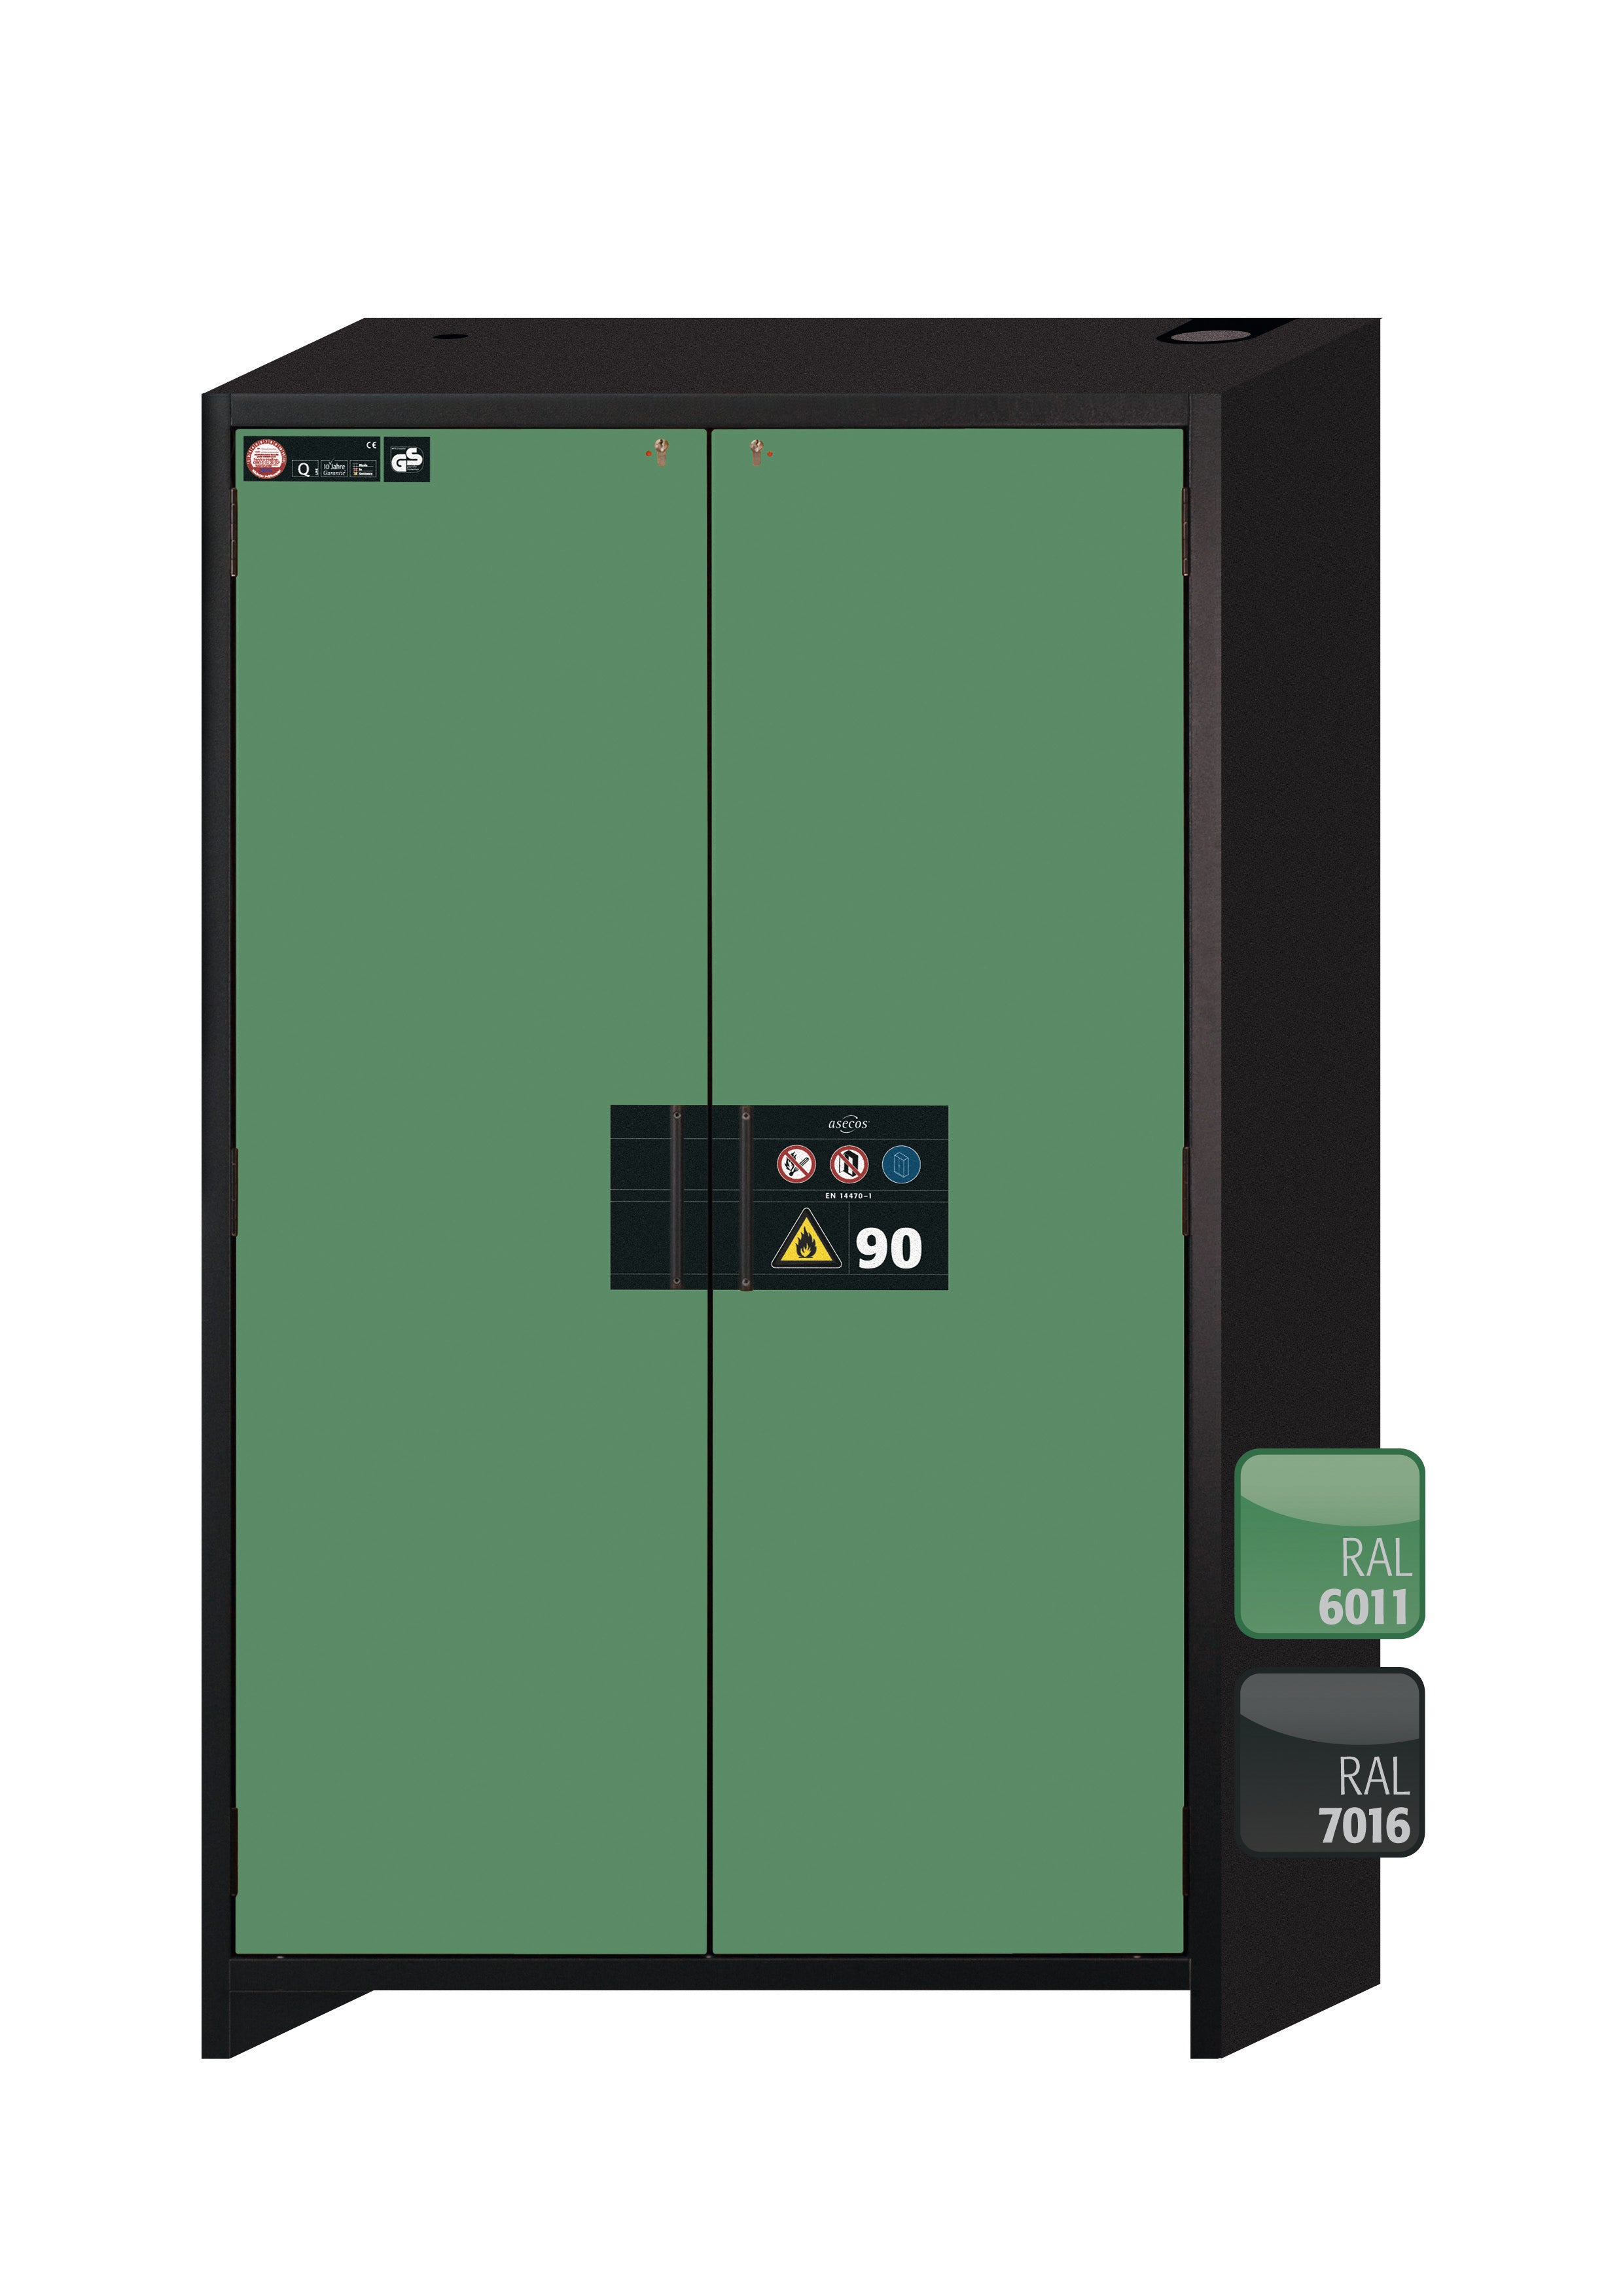 Type 90 safety storage cabinet Q-CLASSIC-90 model Q90.195.120 in reseda green RAL 6011 with 5x drawer (standard) (sheet steel),